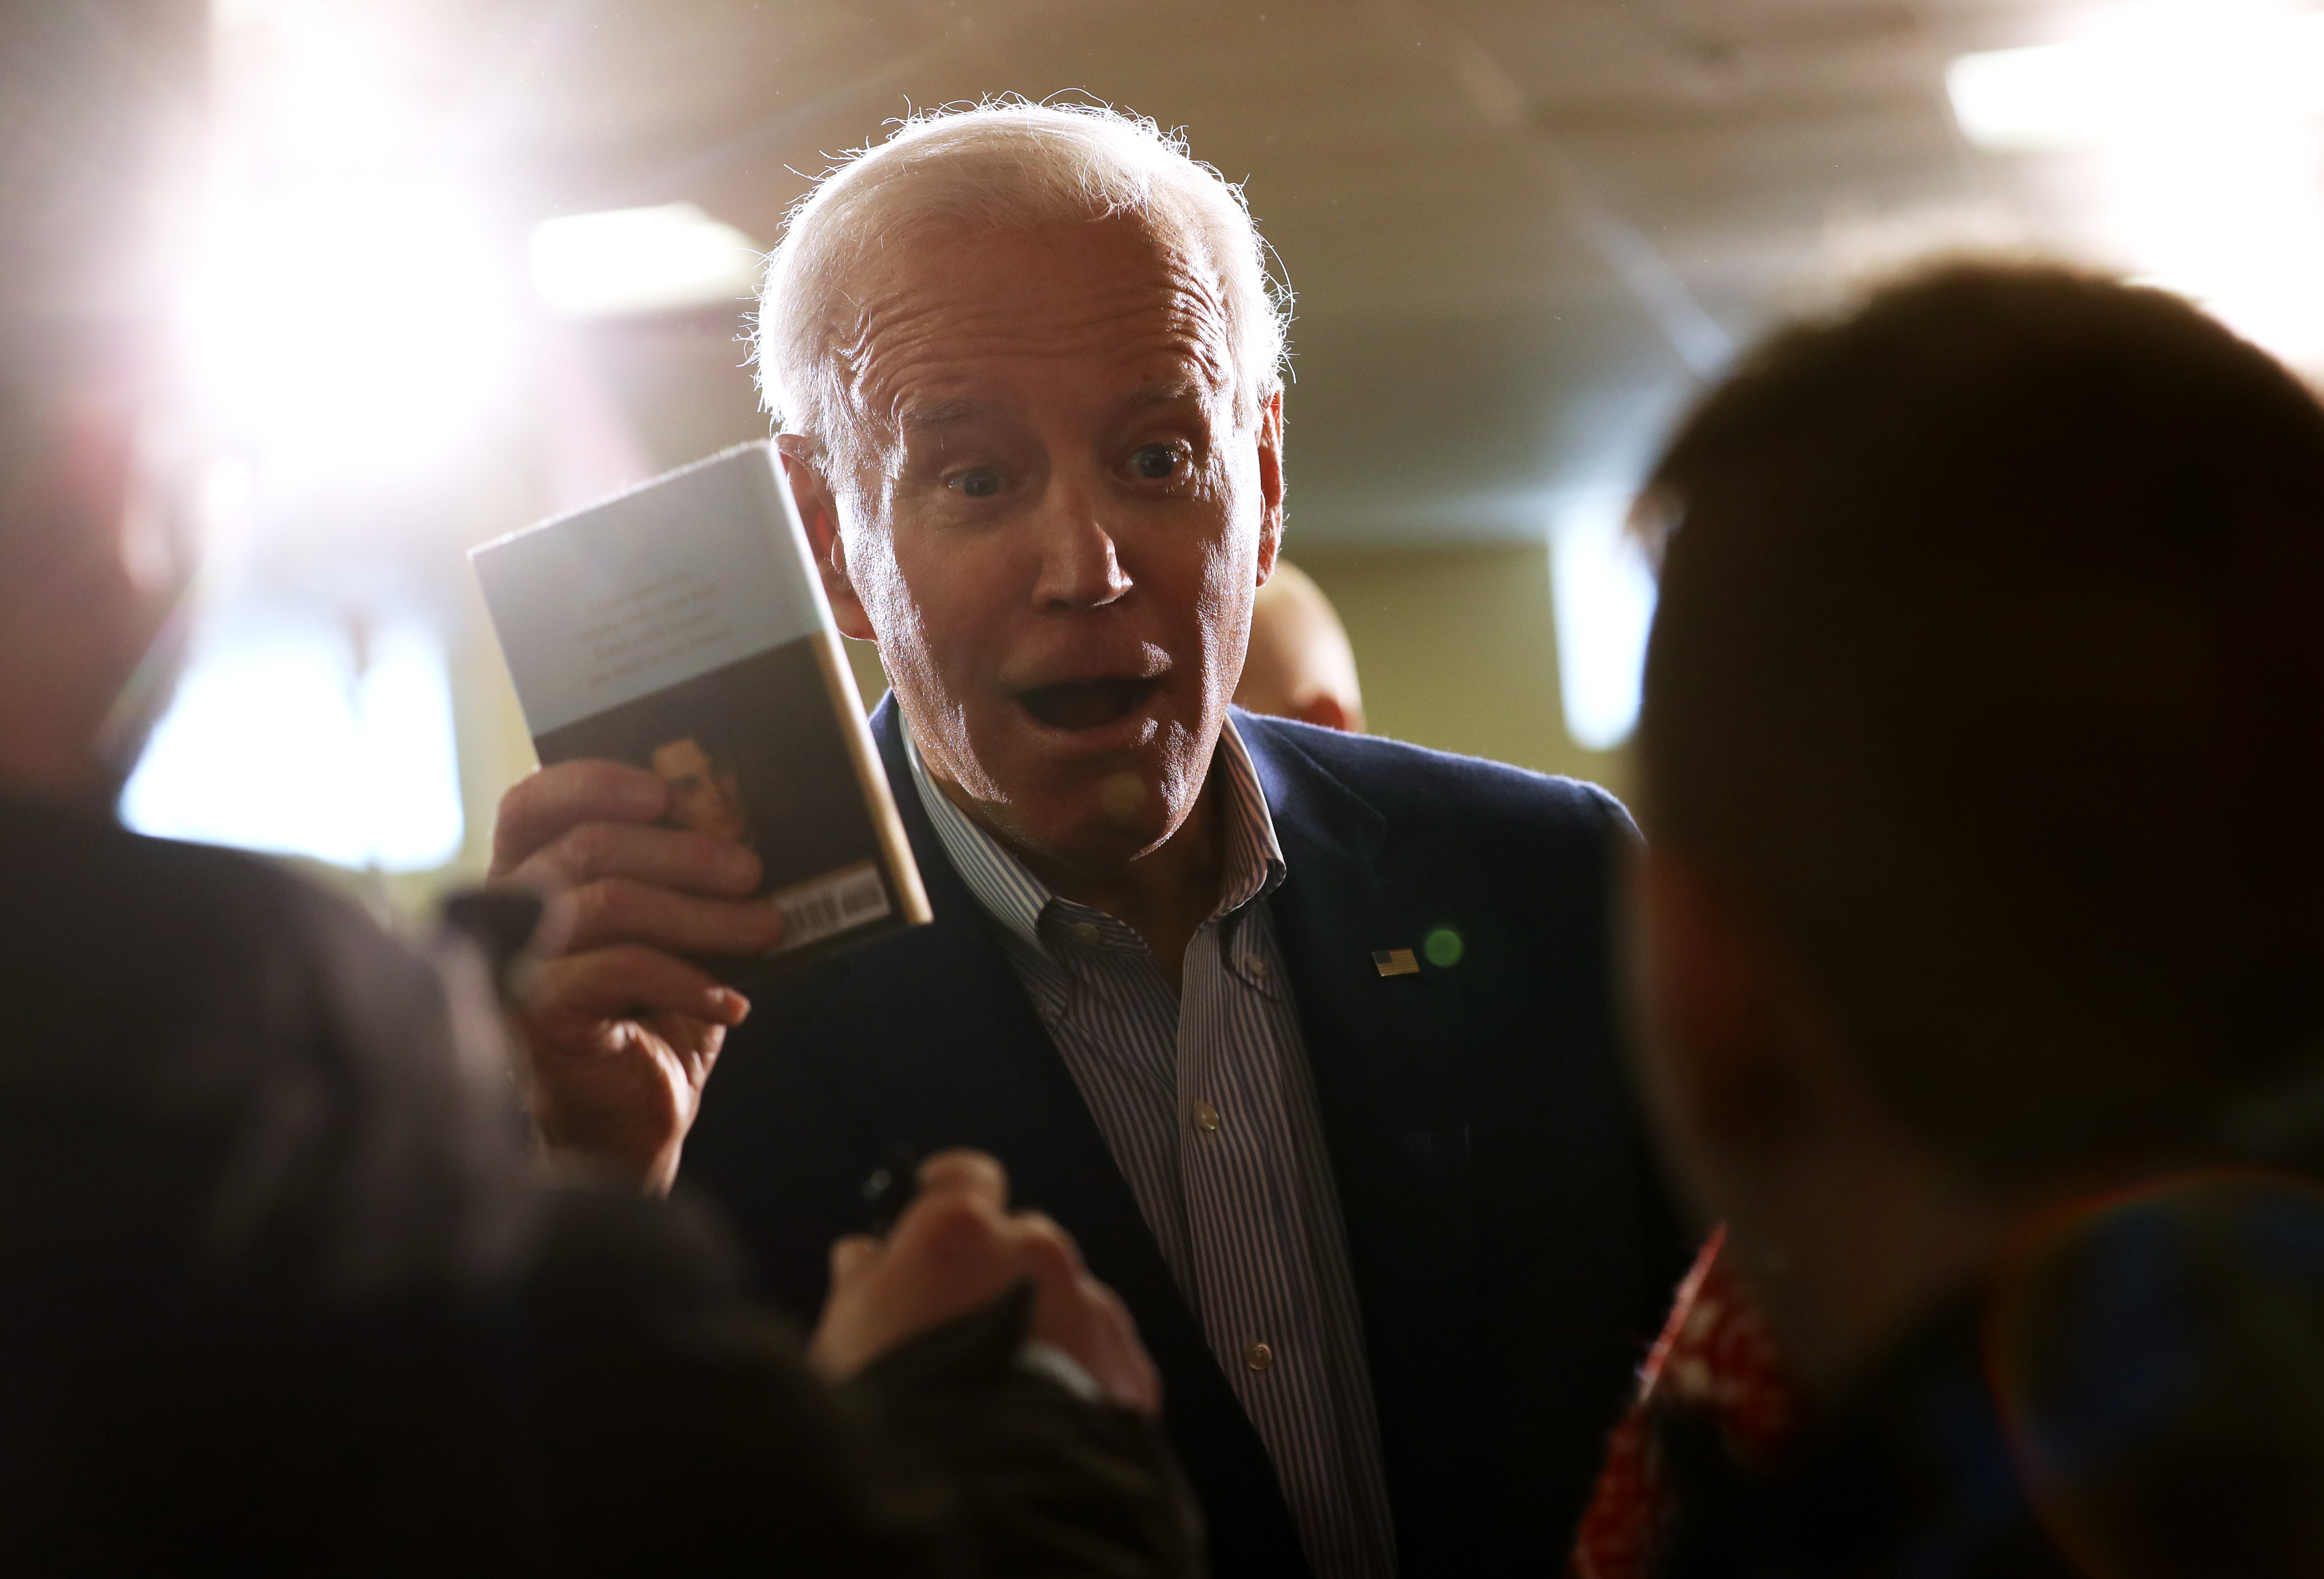 GILFORD, NEW HAMPSHIRE - FEBRUARY 10: Democratic presidential candidate former Vice President Joe Biden greets voters during a campaign event on February 10, 2020 in Gilford, New Hampshire. With one day to go until the New Hampshire primary, Joe Biden is making one last push through the state. (Photo by Justin Sullivan/Getty Images)